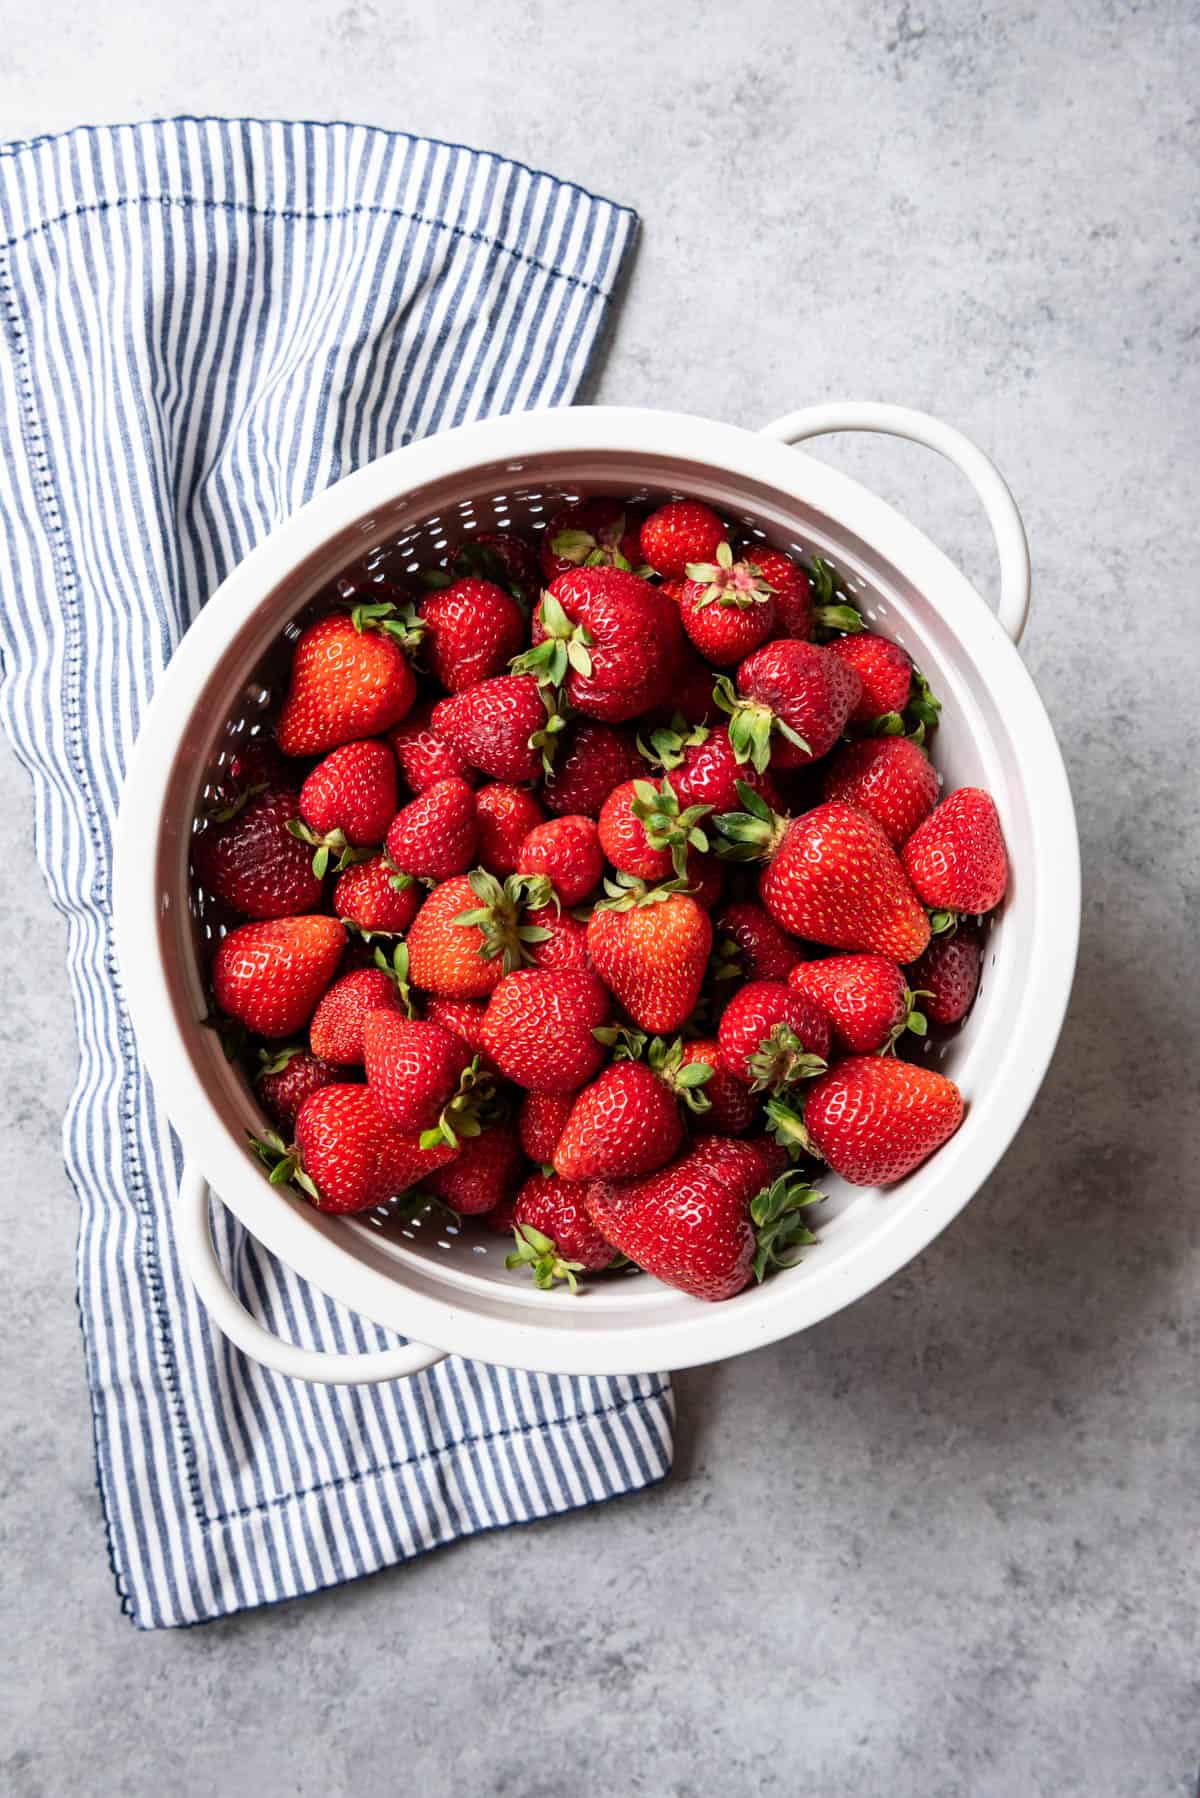 Washed fresh strawberries in a white colander.